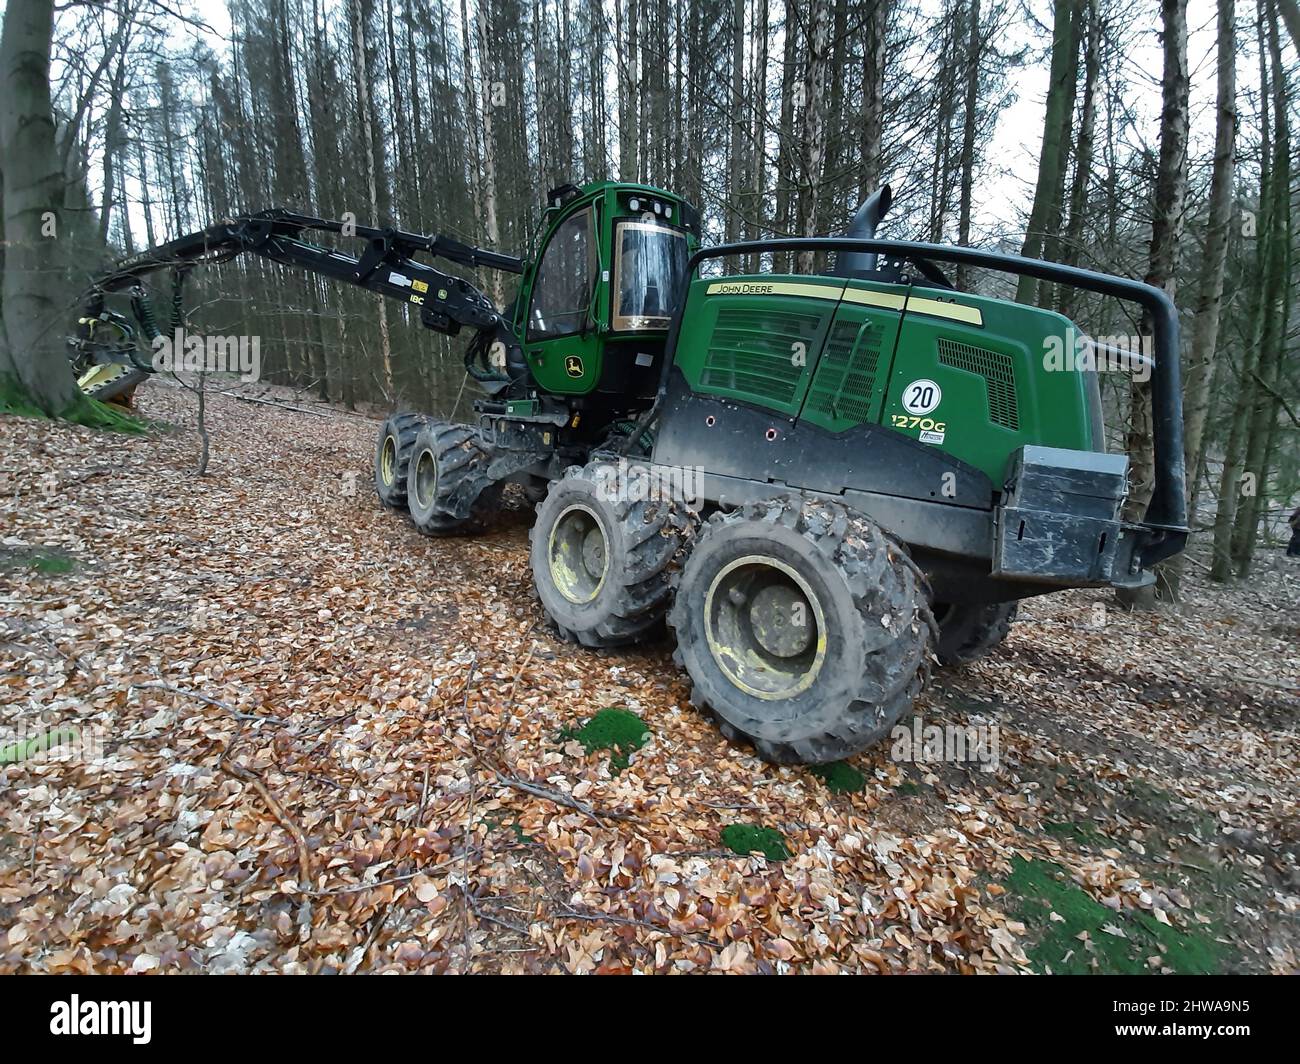 Harvester in forest, Germany Stock Photo